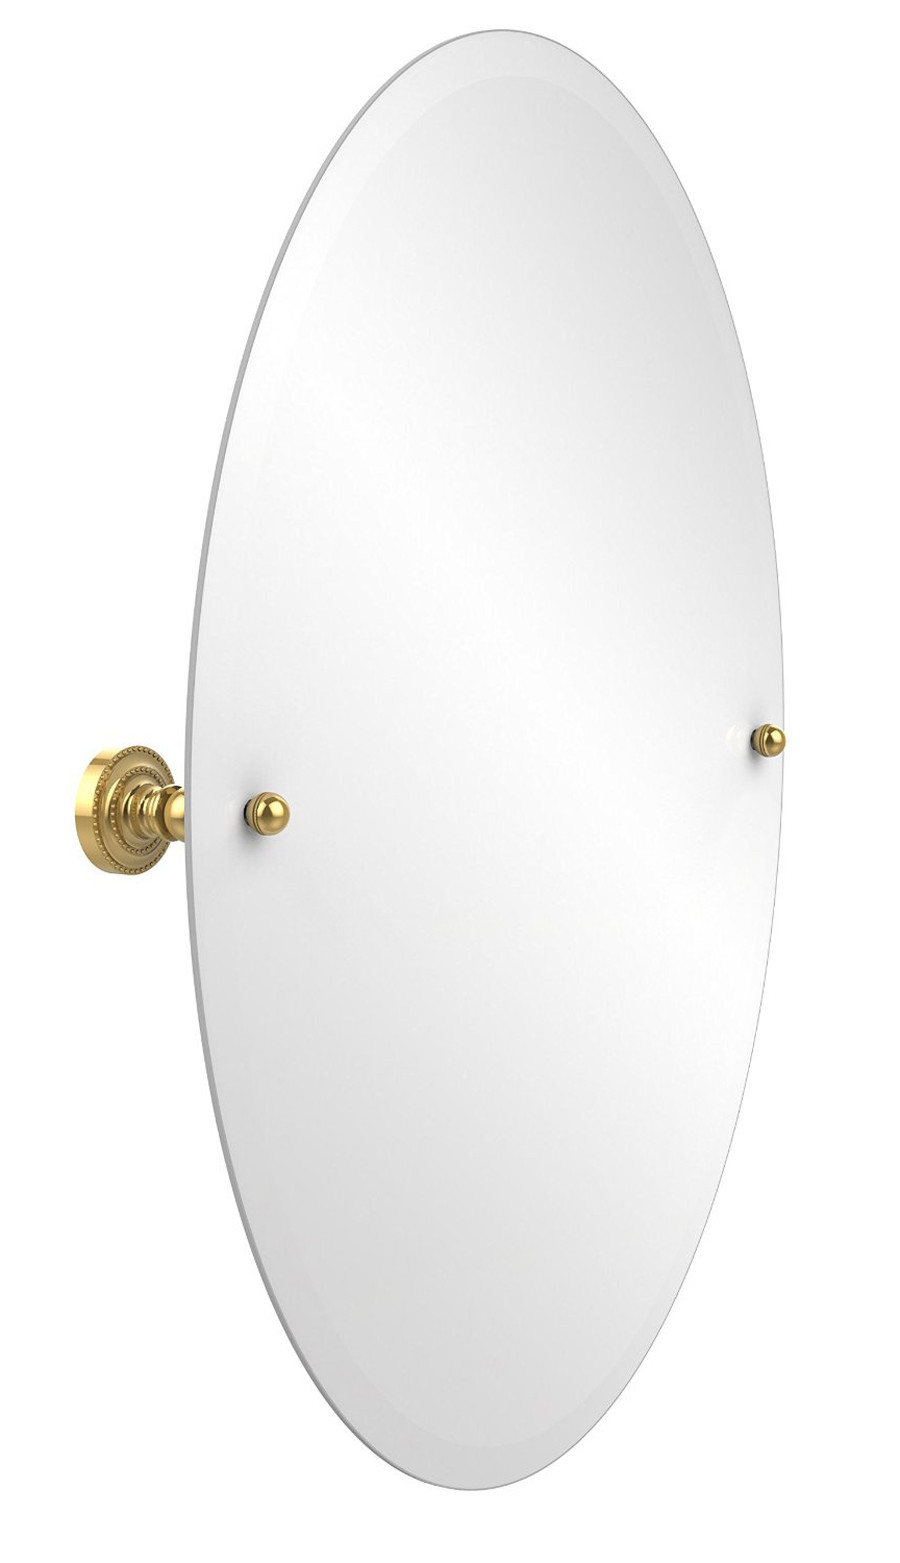 Allied Brass DT-91-PB Oval Tilt Mirror with Beveled Edge in Polished Brass